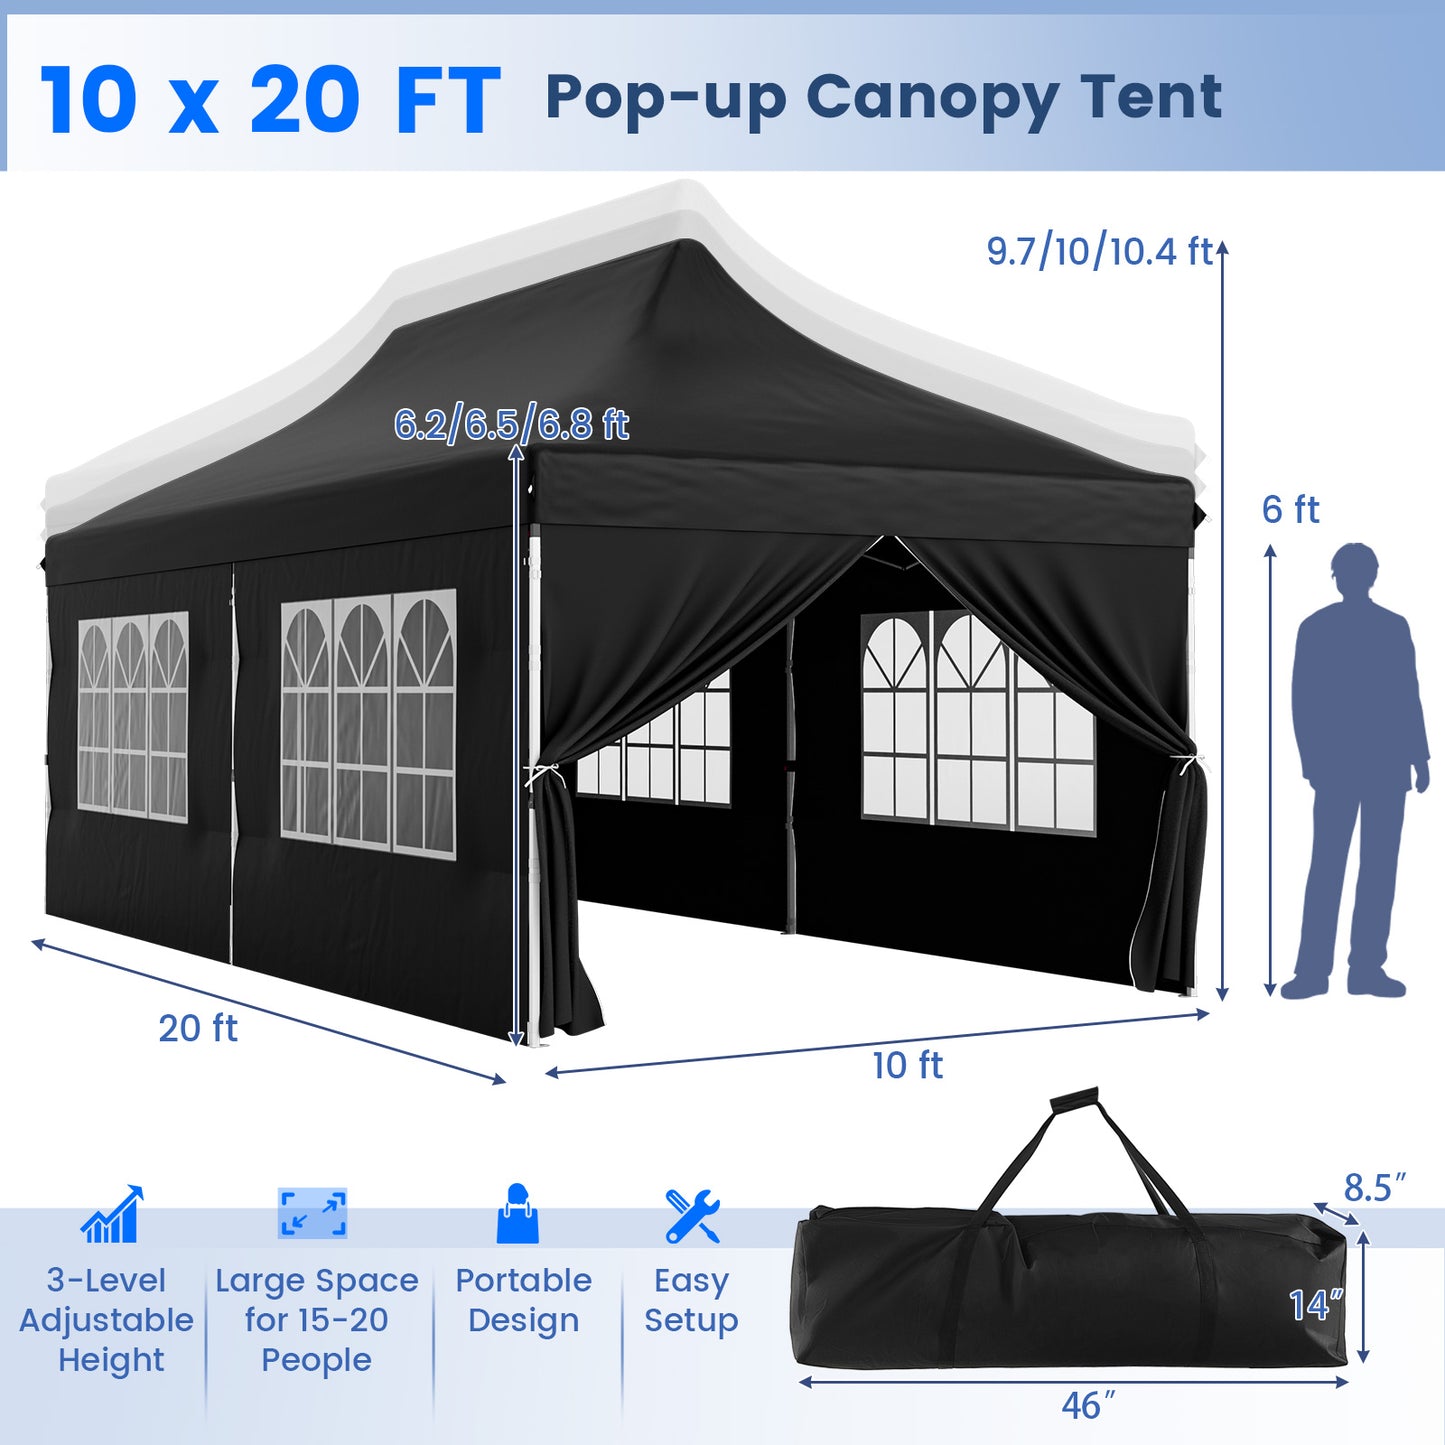 10 x 20 FT Pop up Canopy with 6 Sidewalls and Windows and Carrying Bag for Party Wedding Picnic-Black